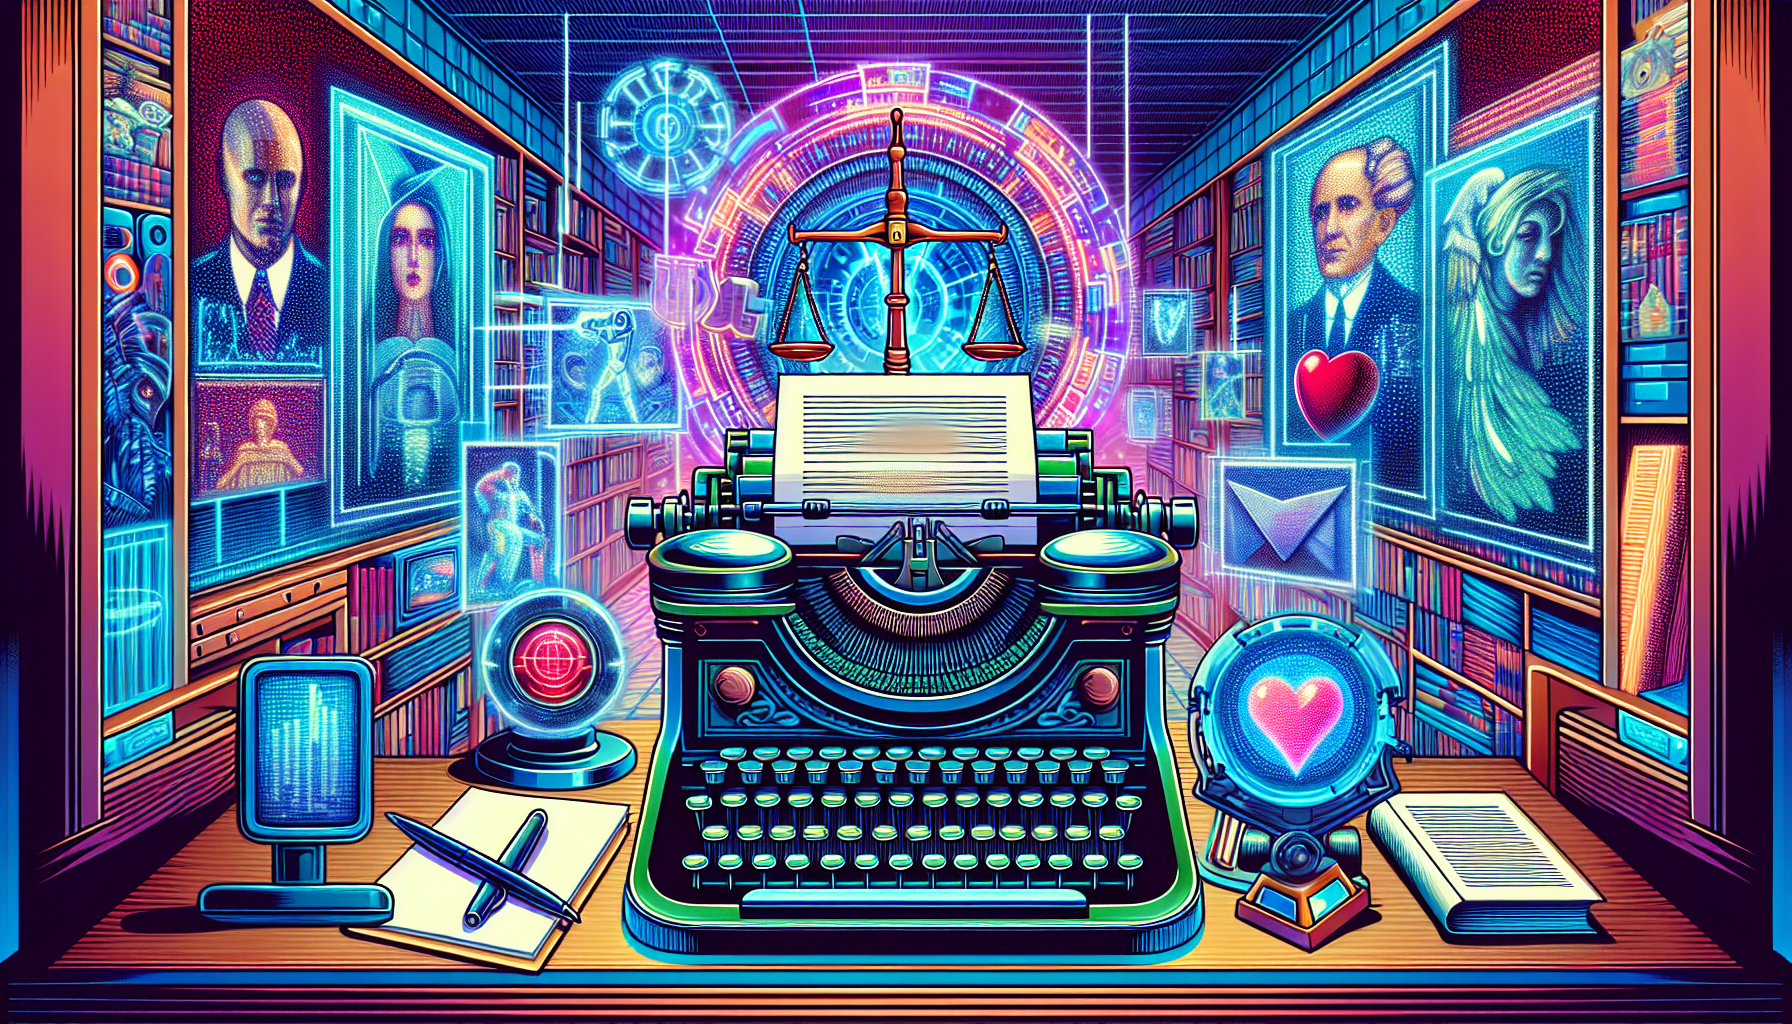 Create an illustration that depicts a movie script being typed on a futuristic typewriter powered by artificial intelligence, surrounded by holographic screens. One screen shows classic scenes from be